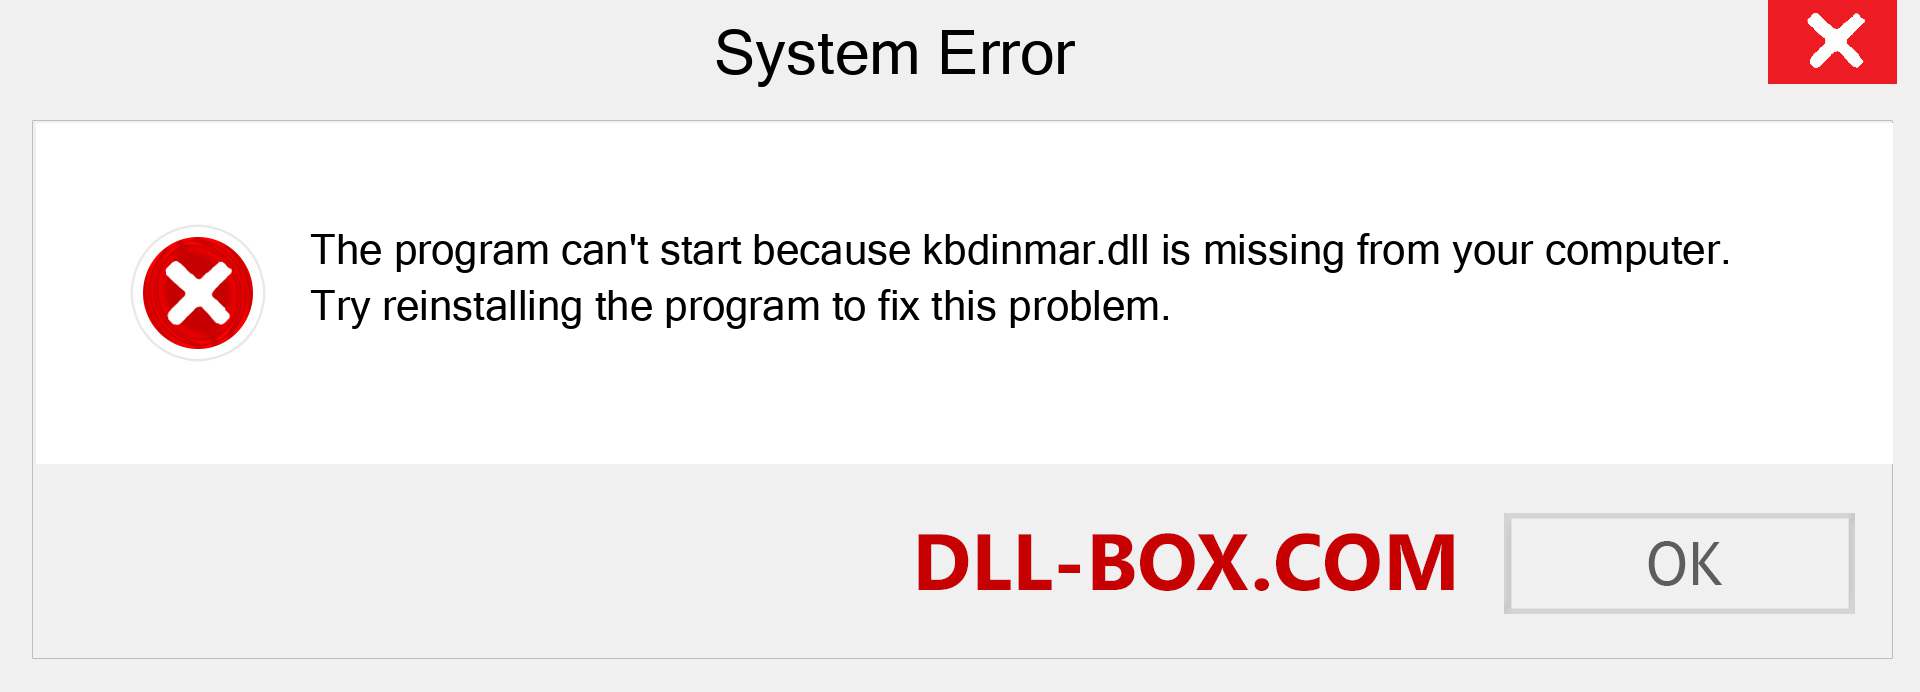  kbdinmar.dll file is missing?. Download for Windows 7, 8, 10 - Fix  kbdinmar dll Missing Error on Windows, photos, images